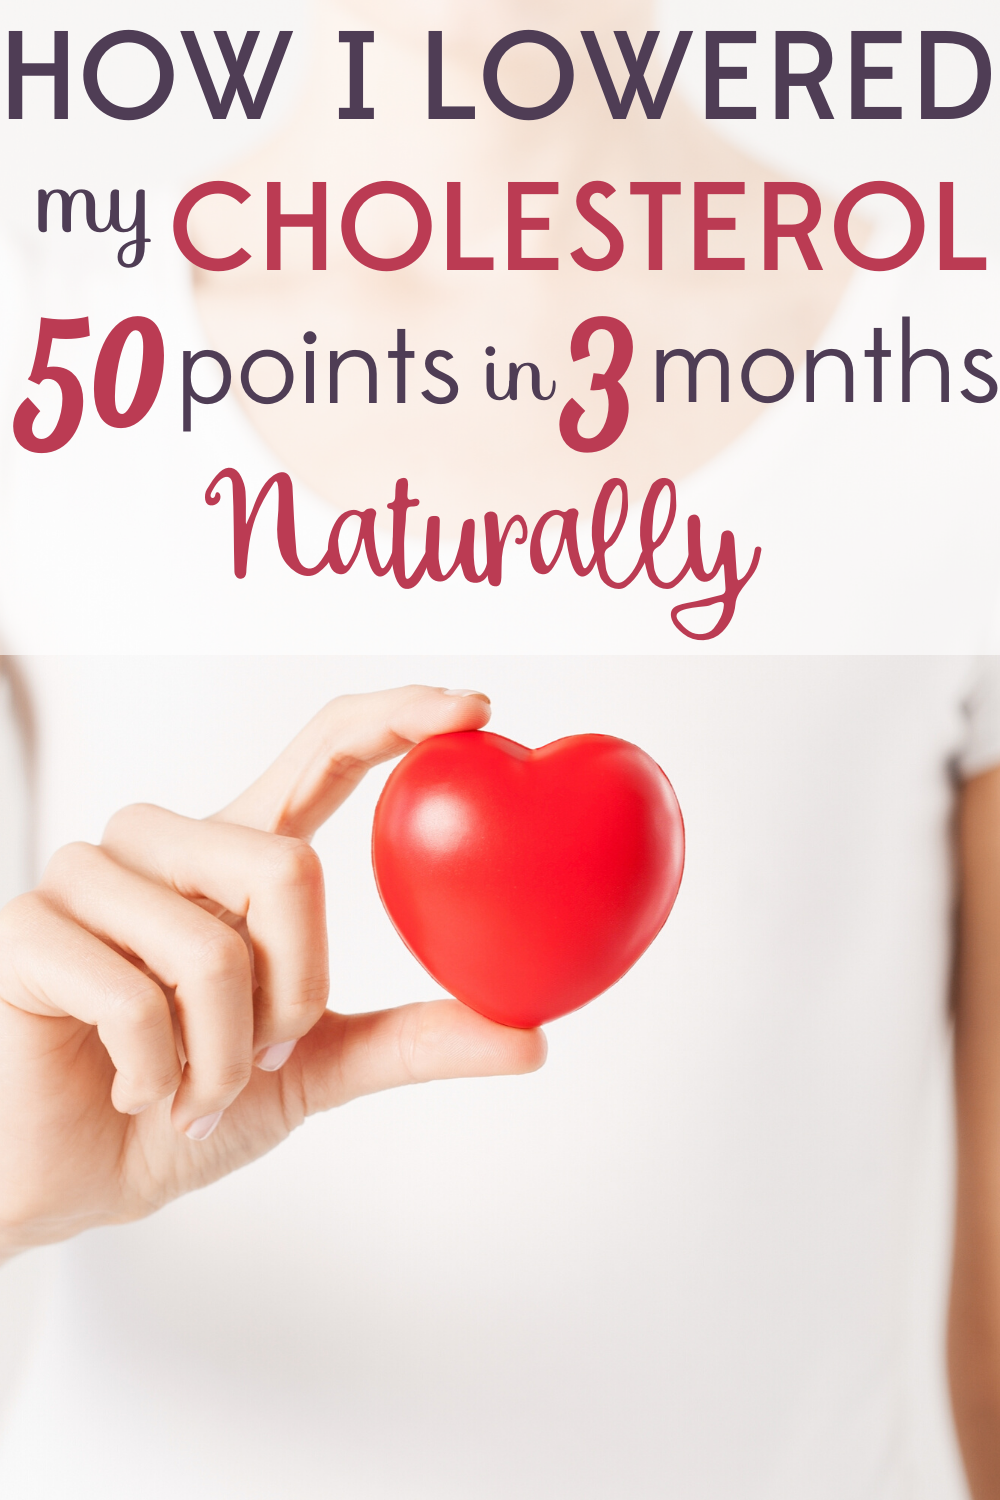 How I Lowered My Cholesterol 50 Points in 3 Months ...